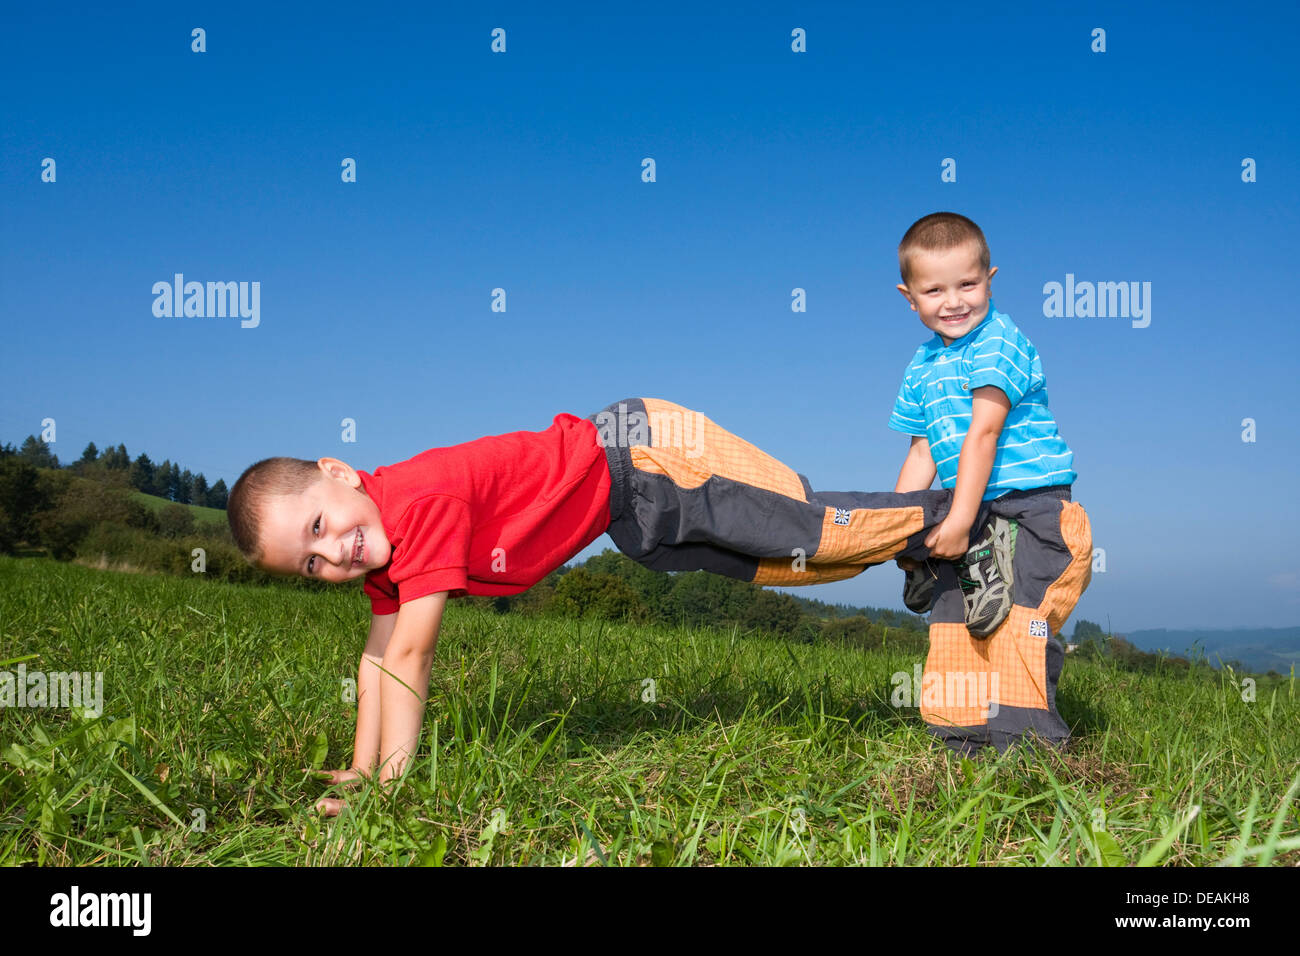 Boys, 6 and 4 years, playing in a meadow Stock Photo